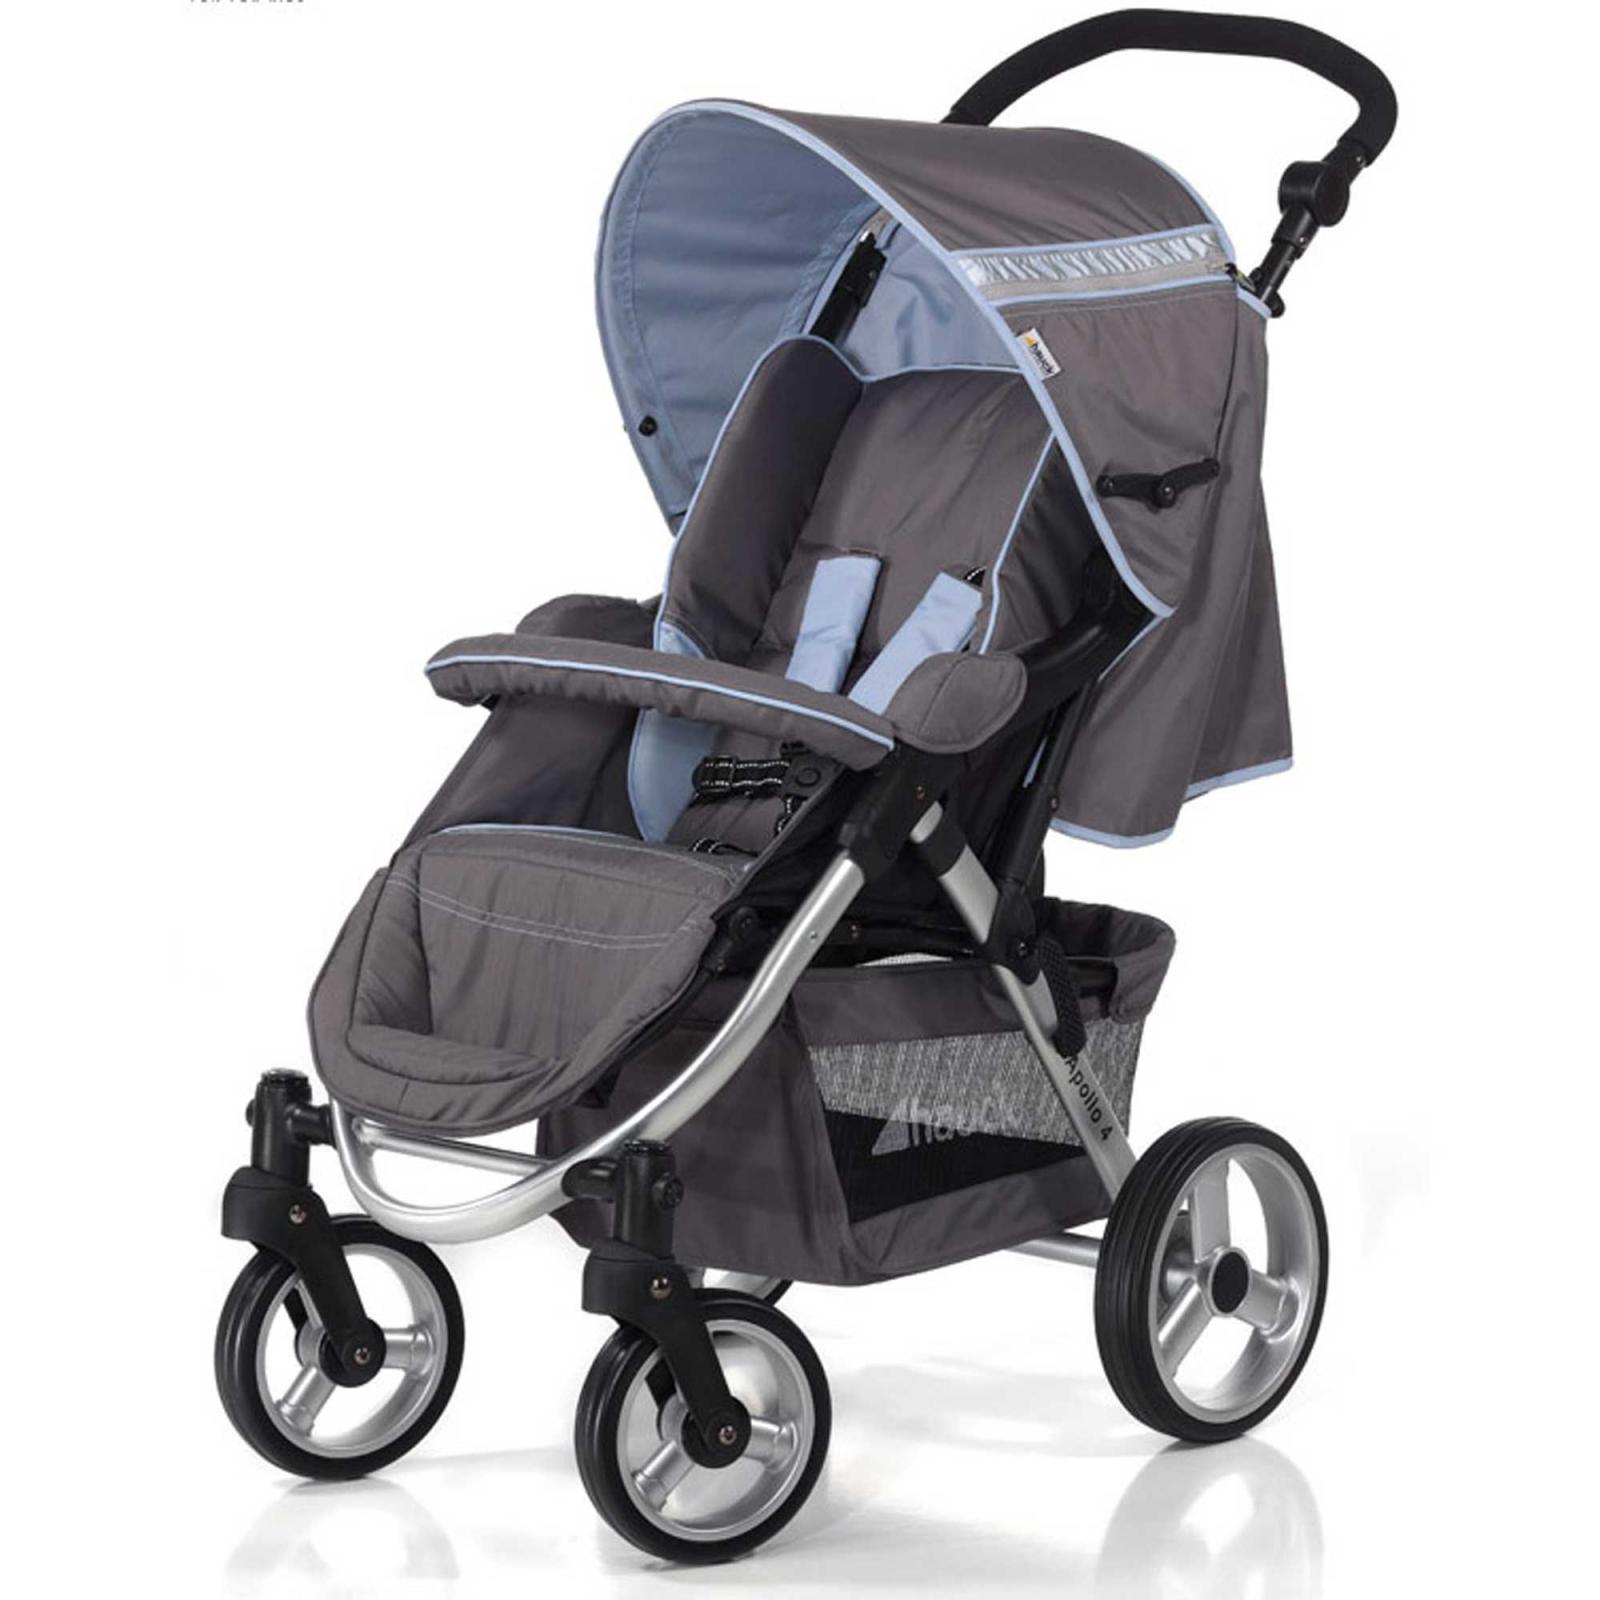 mave Ydeevne sår Hauck Apollo stroller reviews, questions, dimensions | pushchair experts  advise @Strollberry